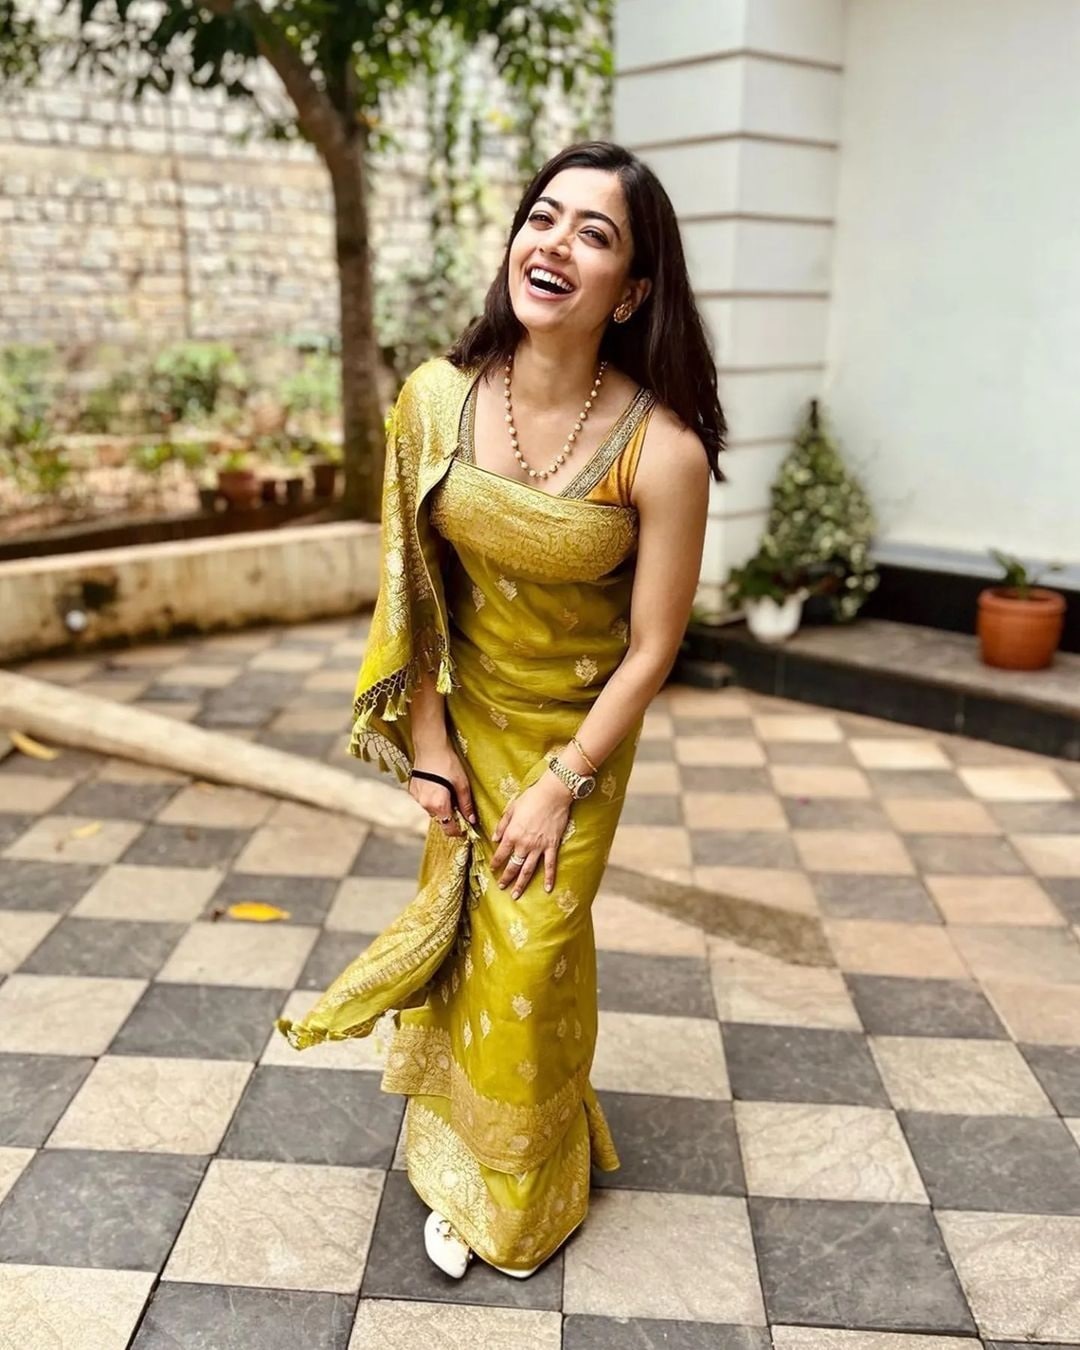 Rashmika Mandanna in Shanti Banaras’ olive green tussar georgette real zari saree paired with a hand-embroidered blouse, draped in traditional Coorg style.